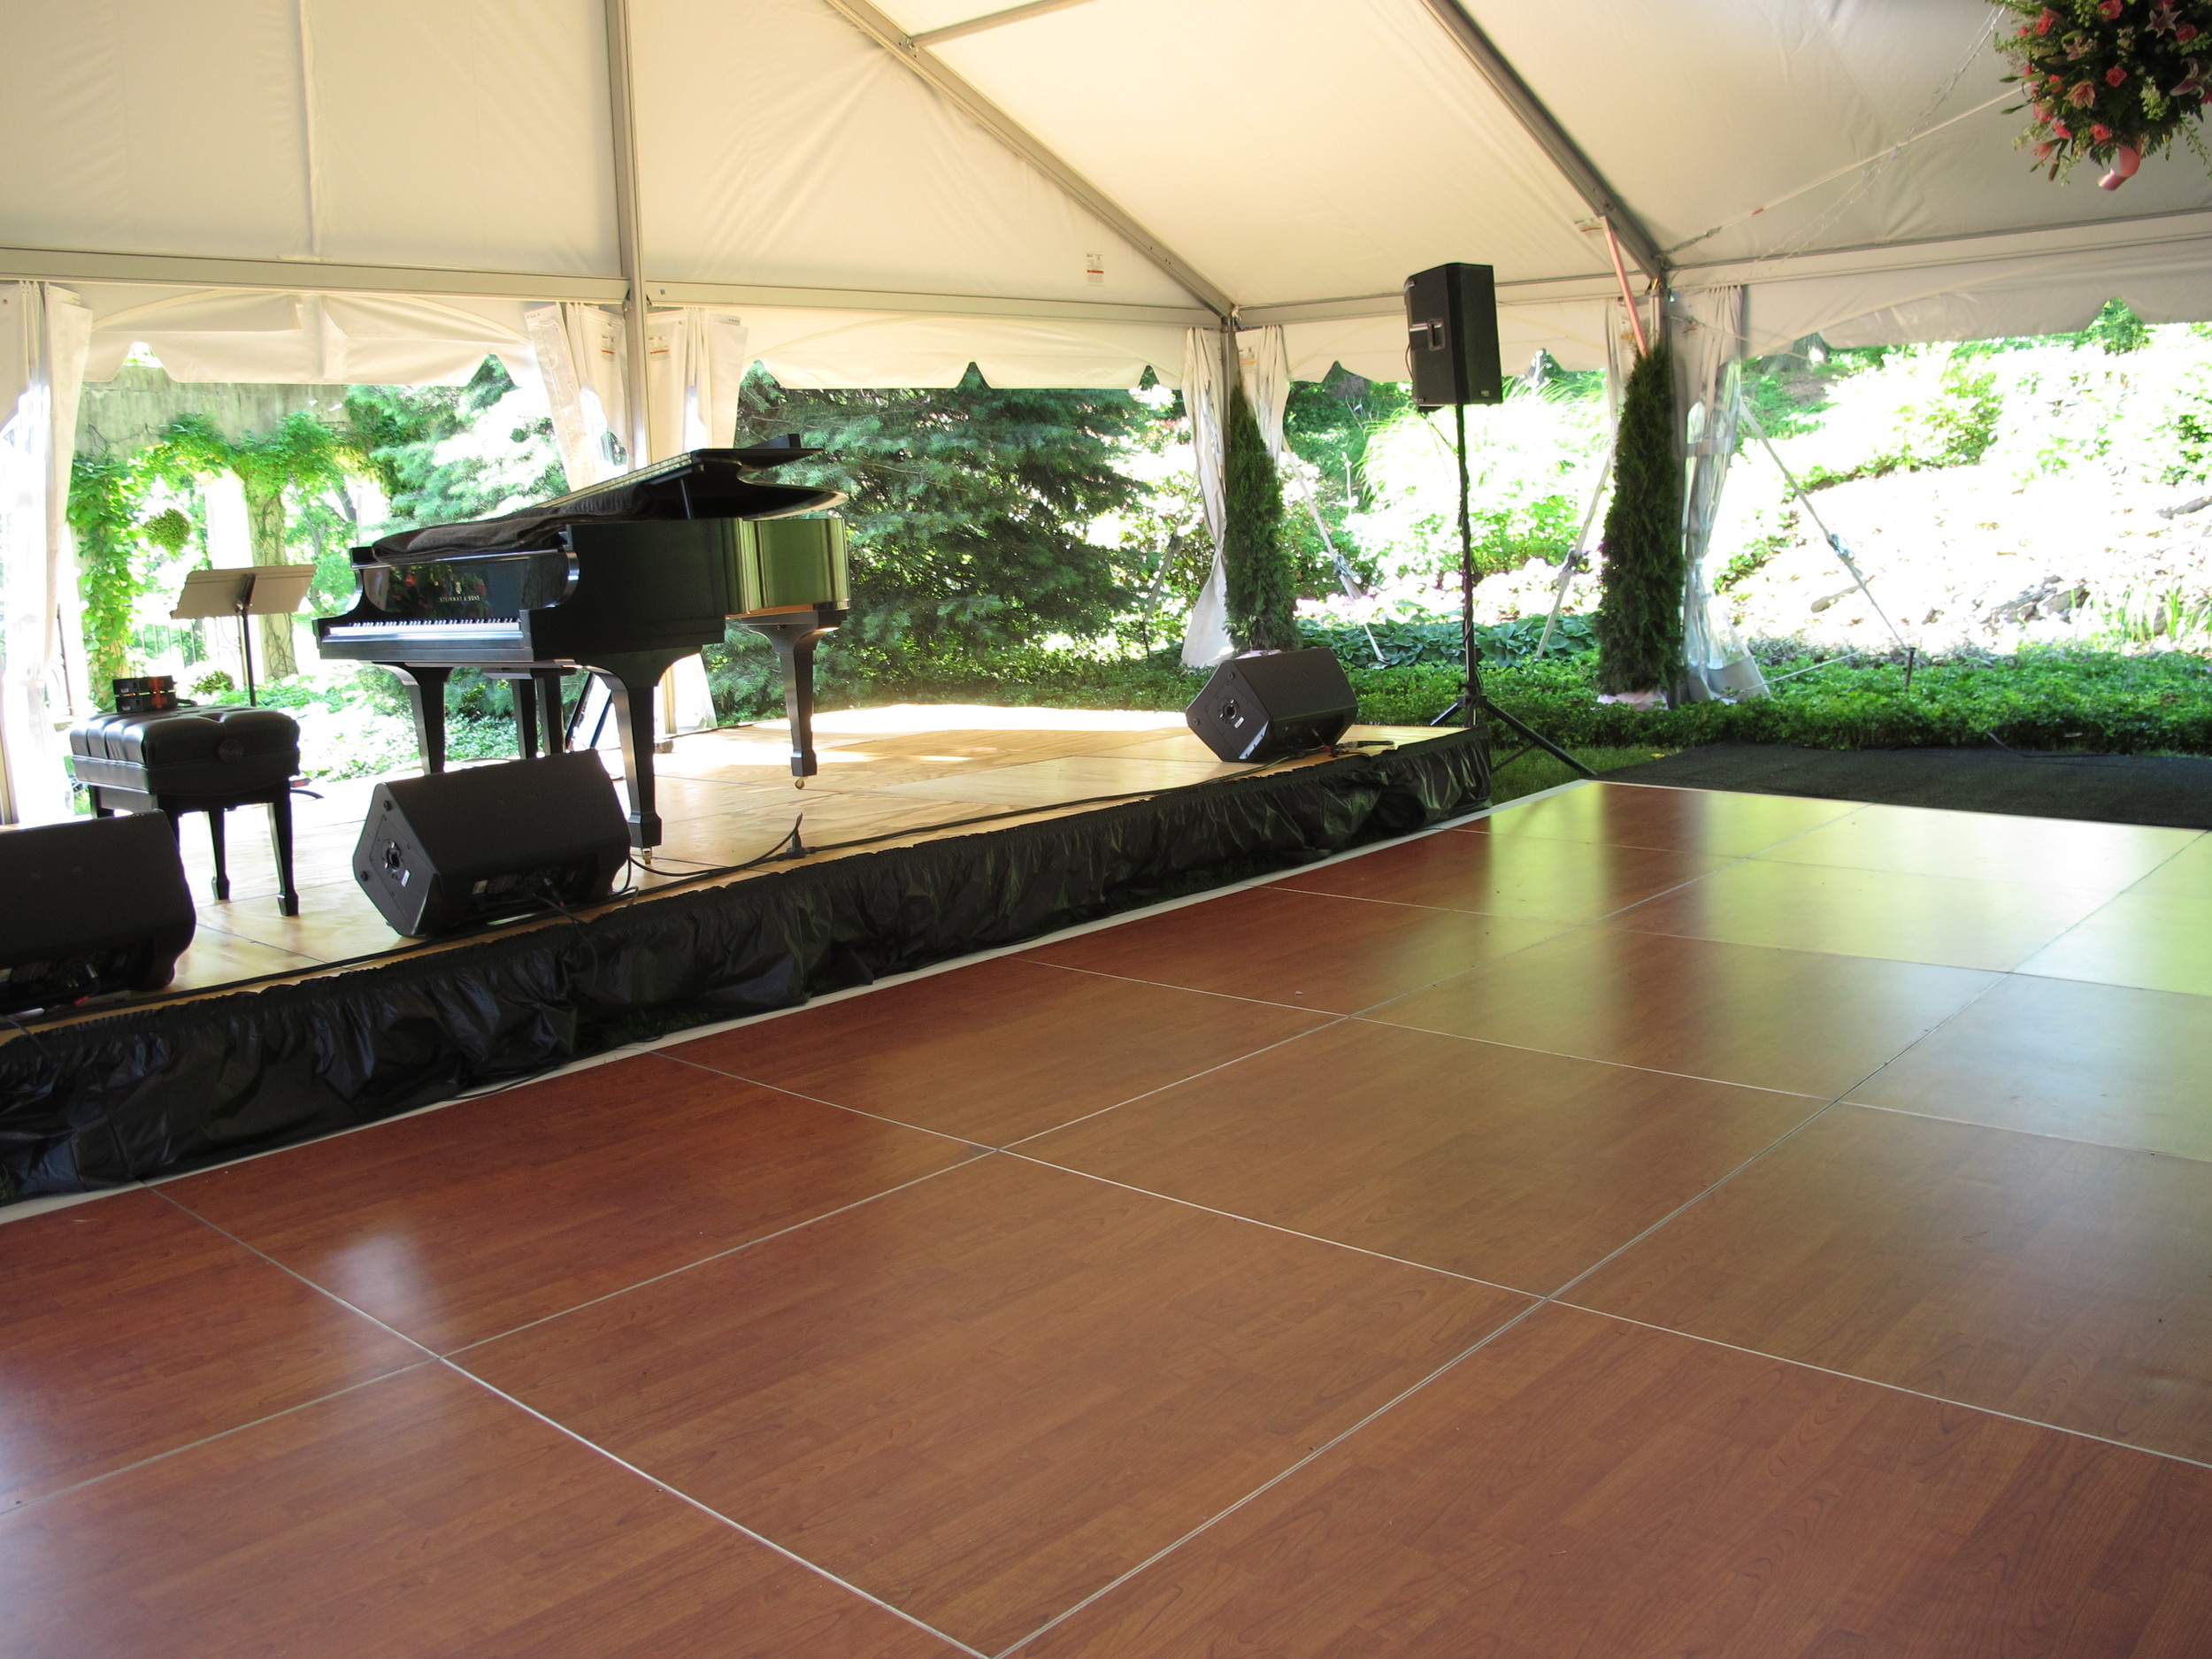 Rental stage for event